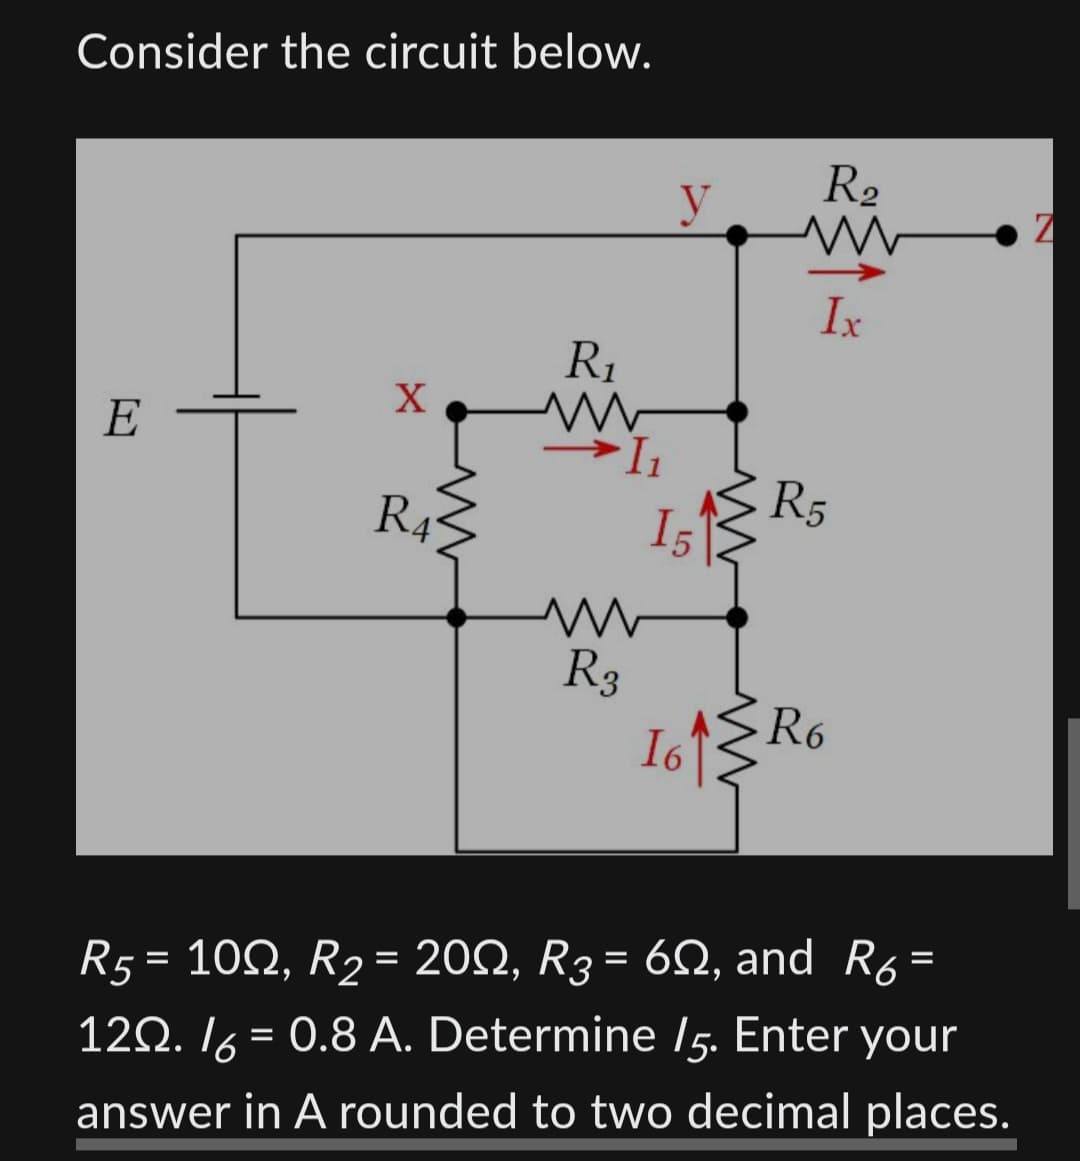 Consider the circuit below.
E
X
R4
R₁
m
→L₁
www
R3
y
15
16
R₂
Ix
R5
R6
R5 = 100, R₂ = 20N, R3 = 6N, and R6=
120./6= 0.8 A. Determine /5. Enter your
answer in A rounded to two decimal places.
7